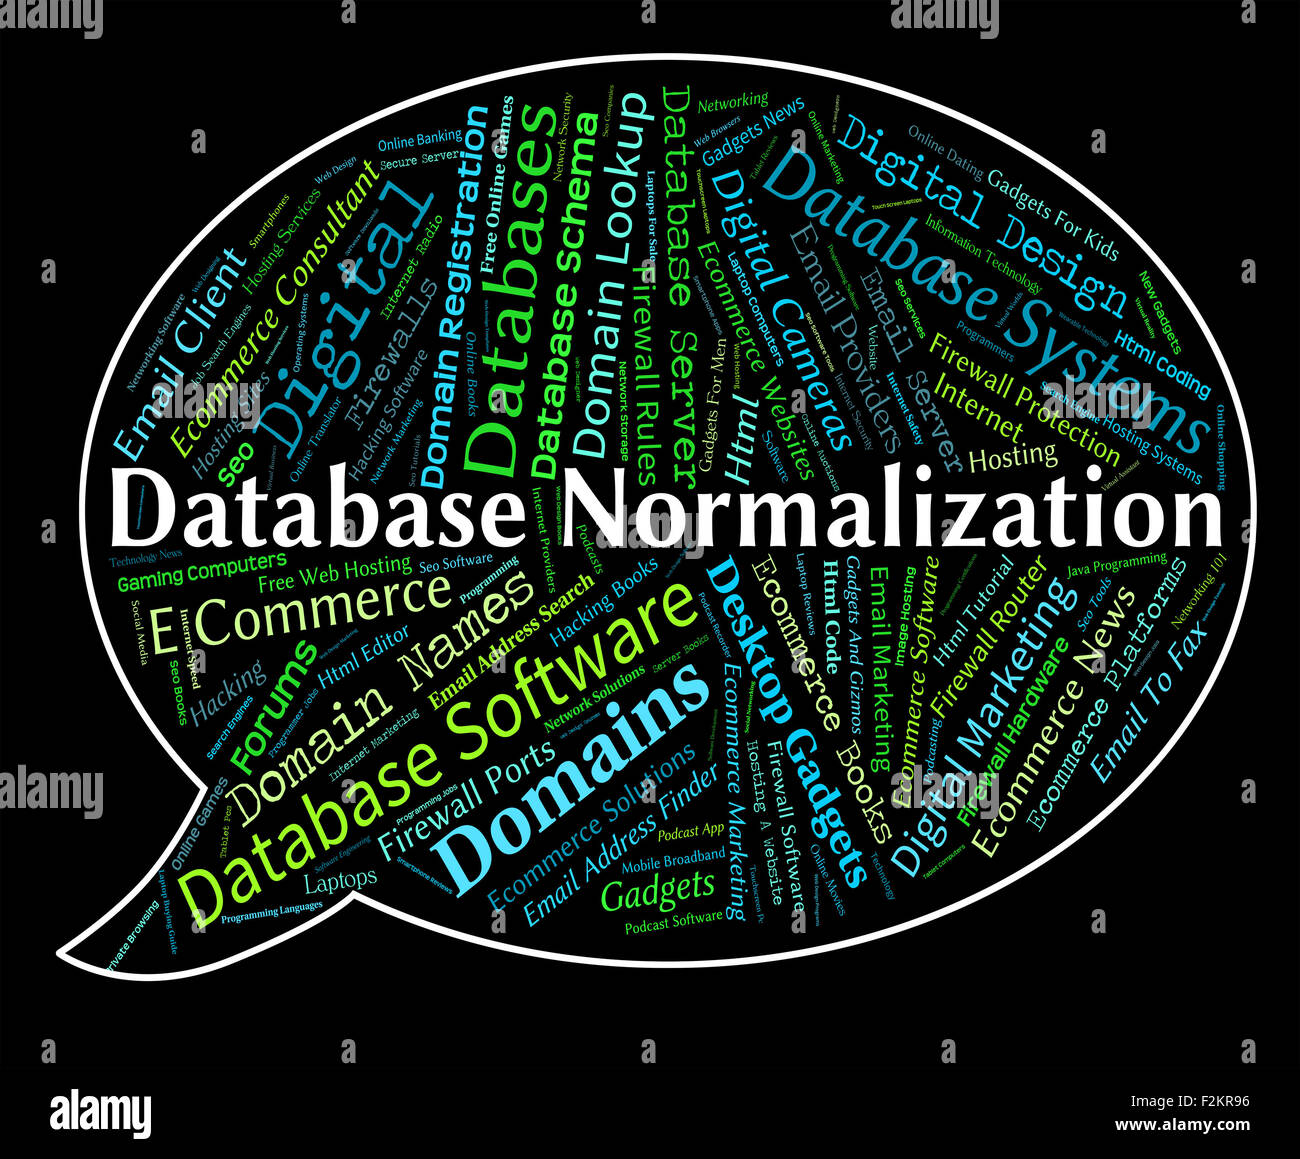 Database Normalization Meaning Normalise Computing And Word Stock Photo